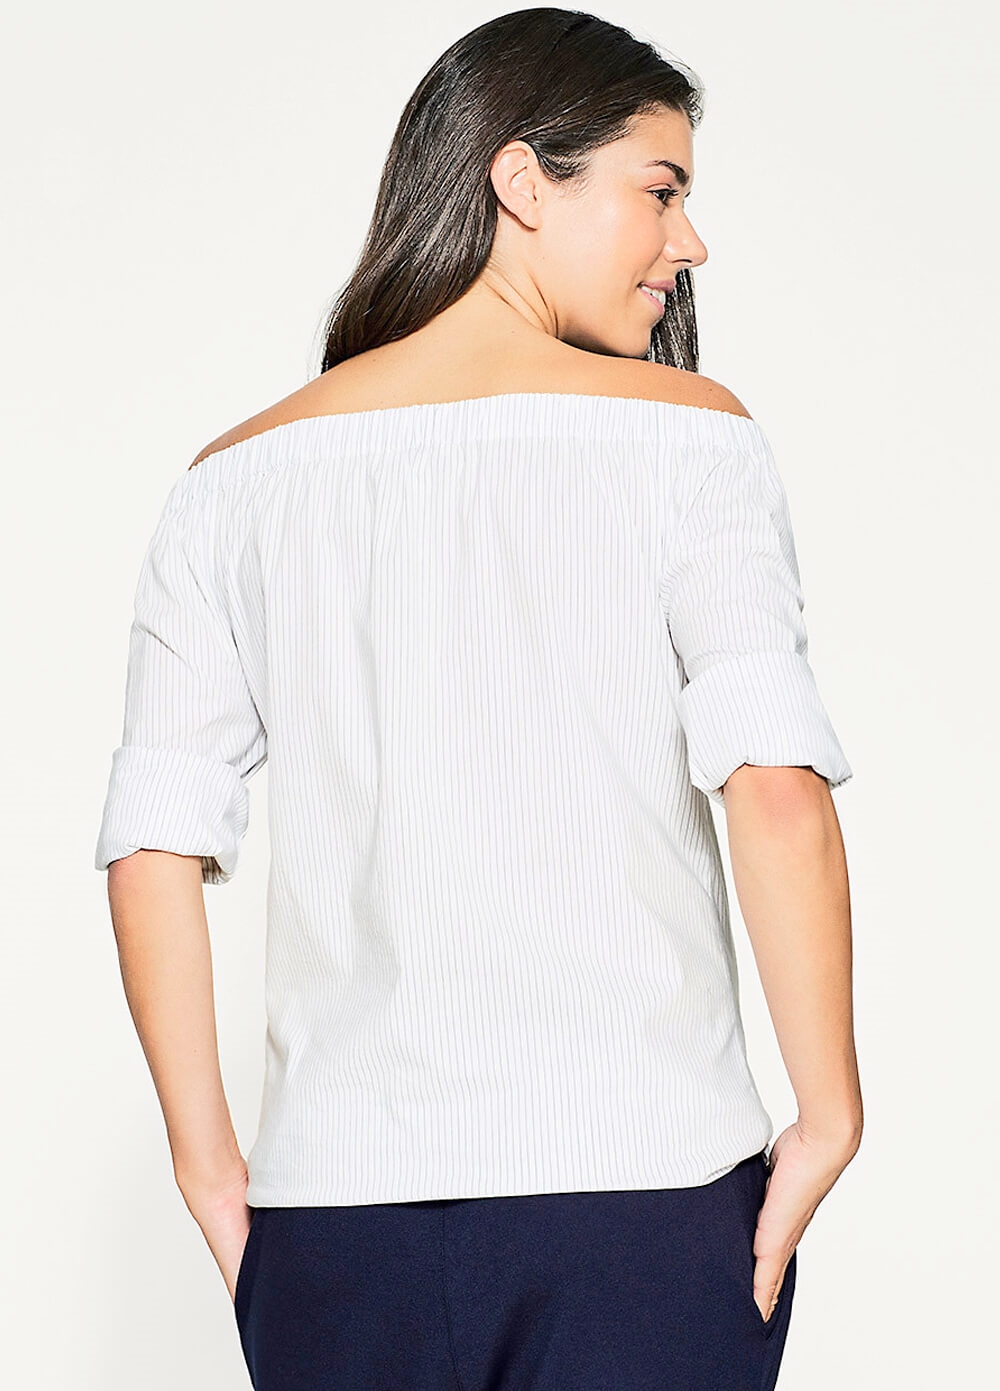 Off Shoulder Pinstriped Maternity Blouse by Esprit